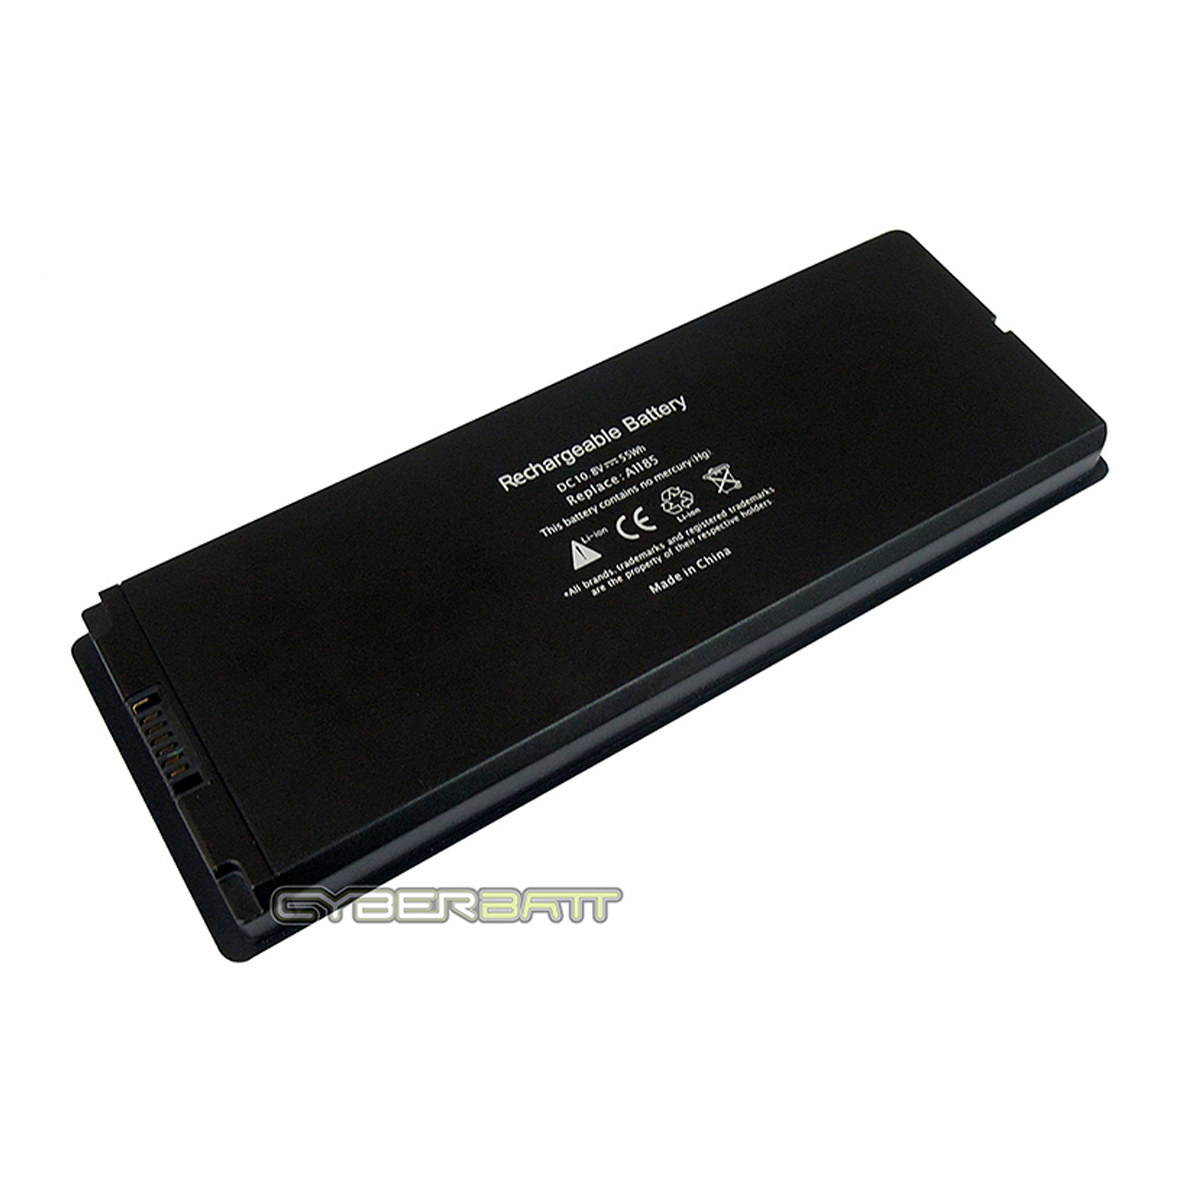 2006 macbook pro replacement battery